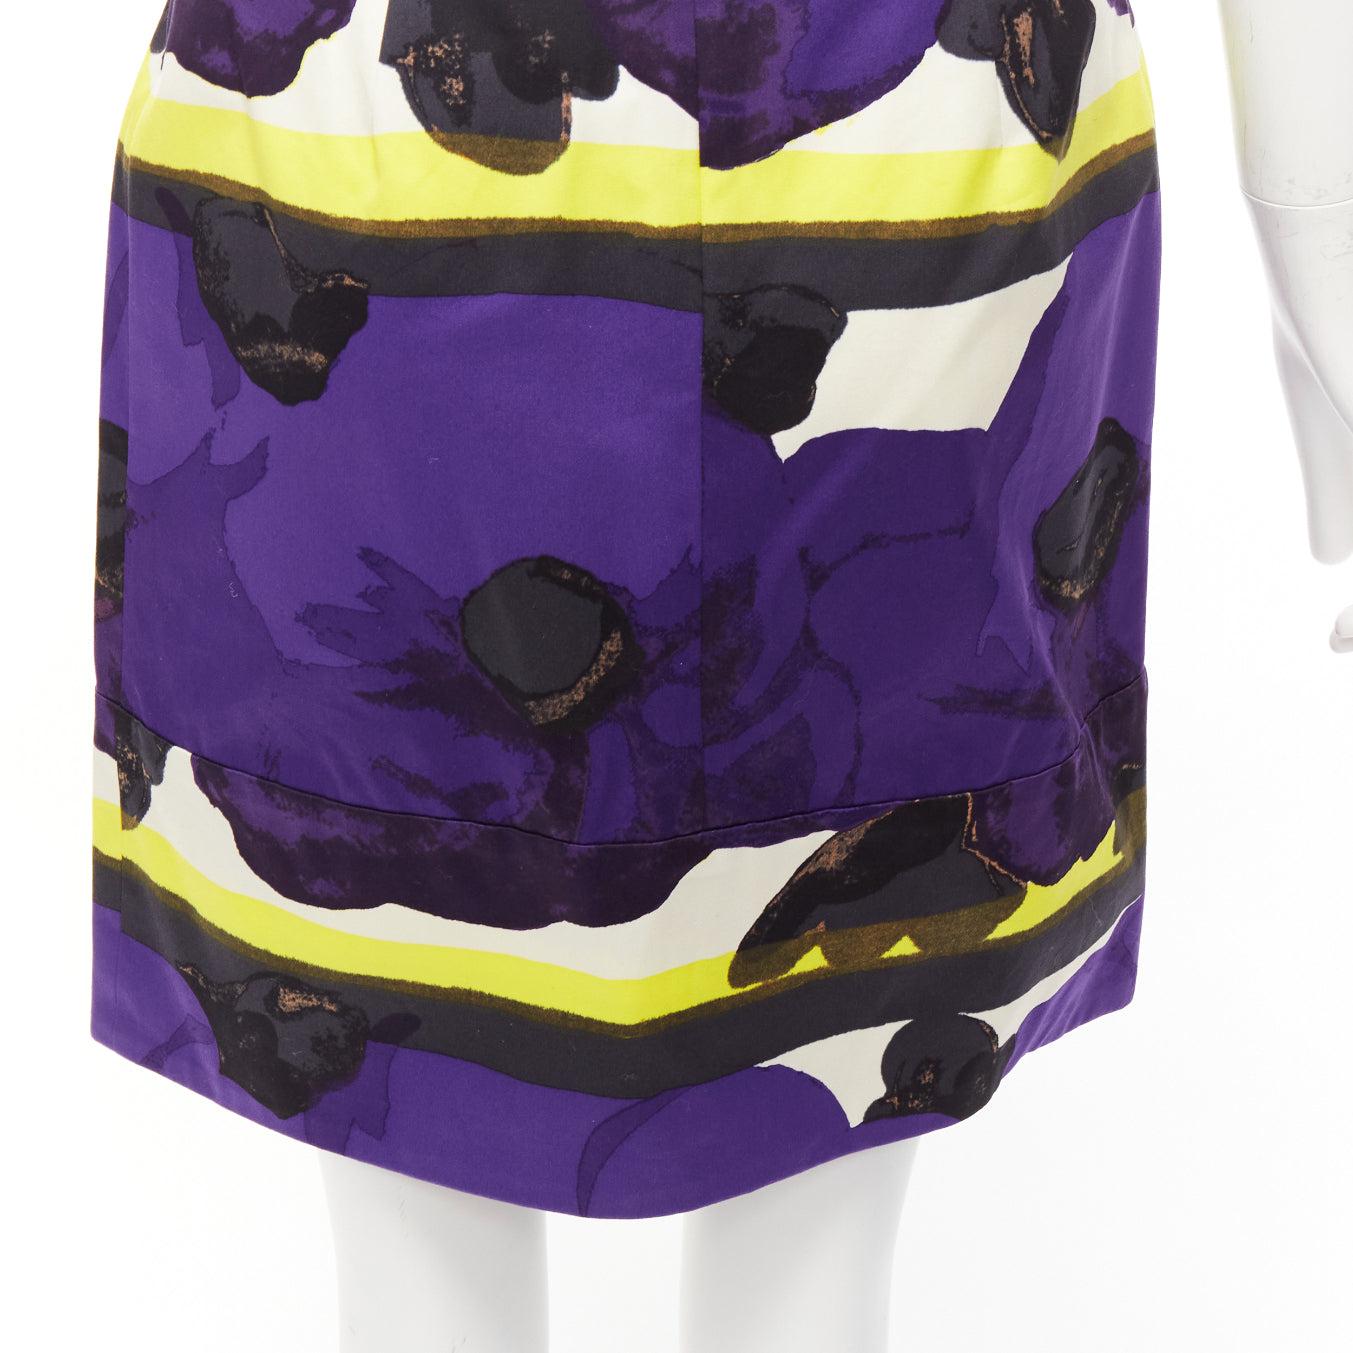 MARNI purple yellow orchid floral print cotton high waist mini skirt IT38 XS
Reference: NKLL/A00223
Brand: Marni
Material: Cotton
Color: Purple, Yellow
Pattern: Floral
Closure: Zip
Lining: White Fabric
Extra Details: Back zip.
Made in: